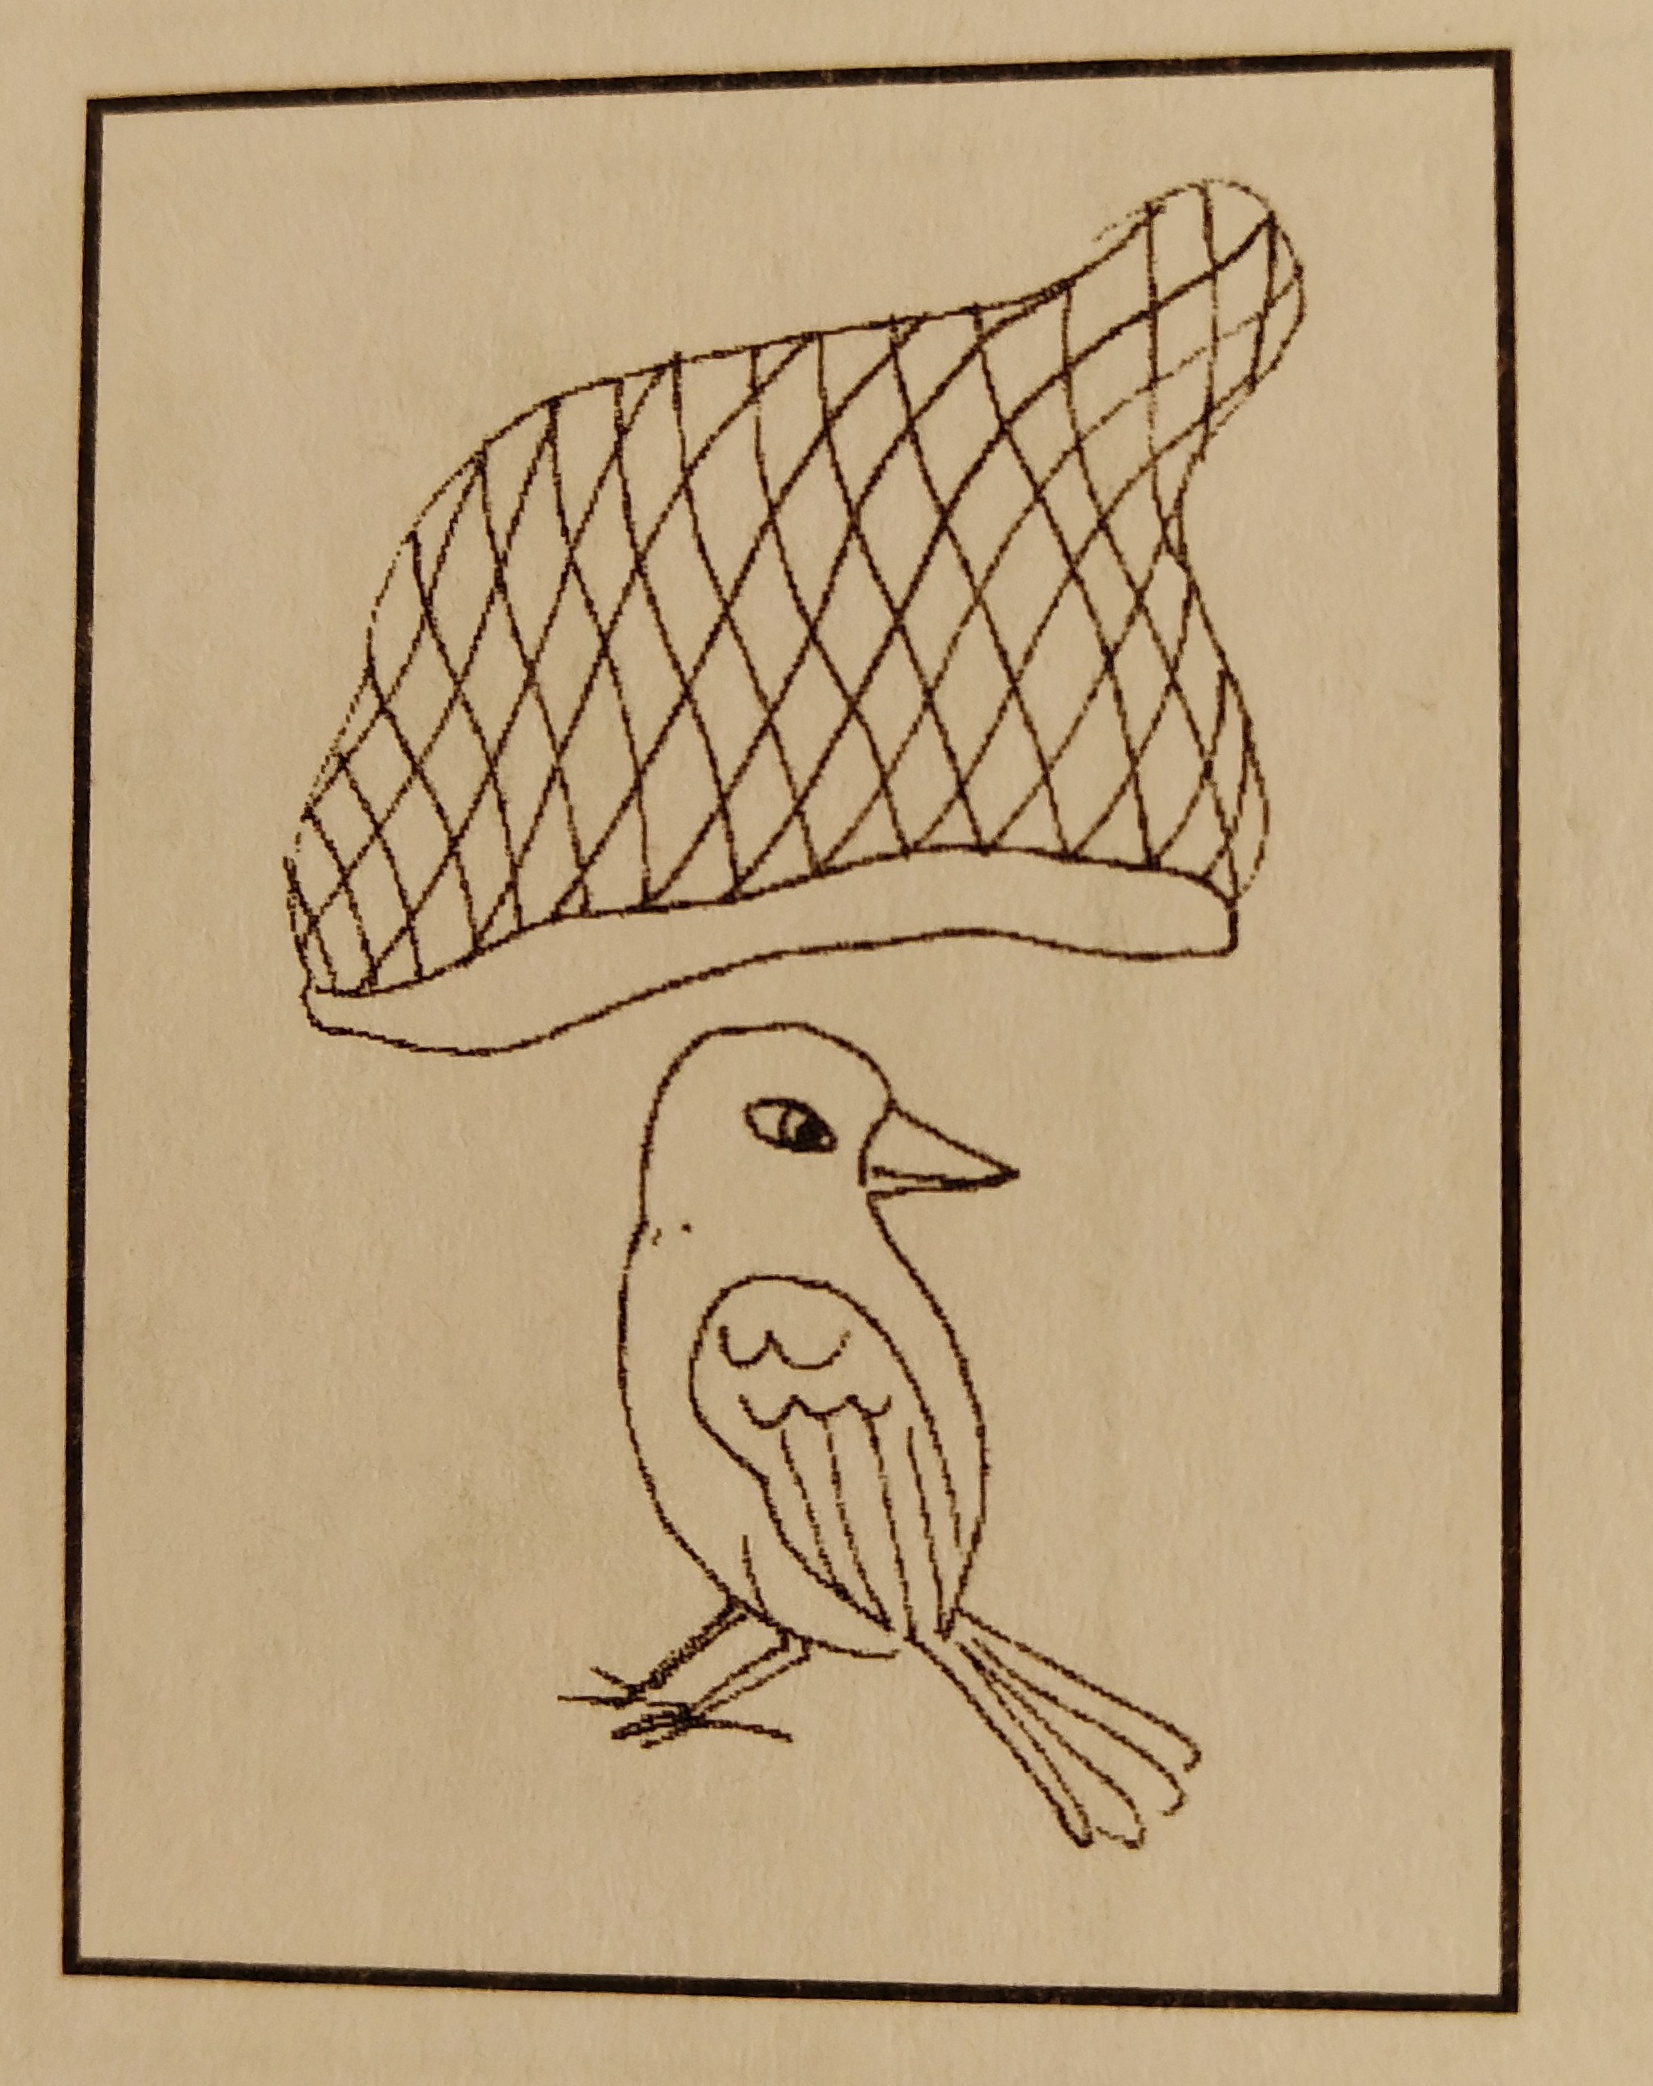 Figure shows you the meaning of 羅 (LAW), a net for catching small bird with short tail.